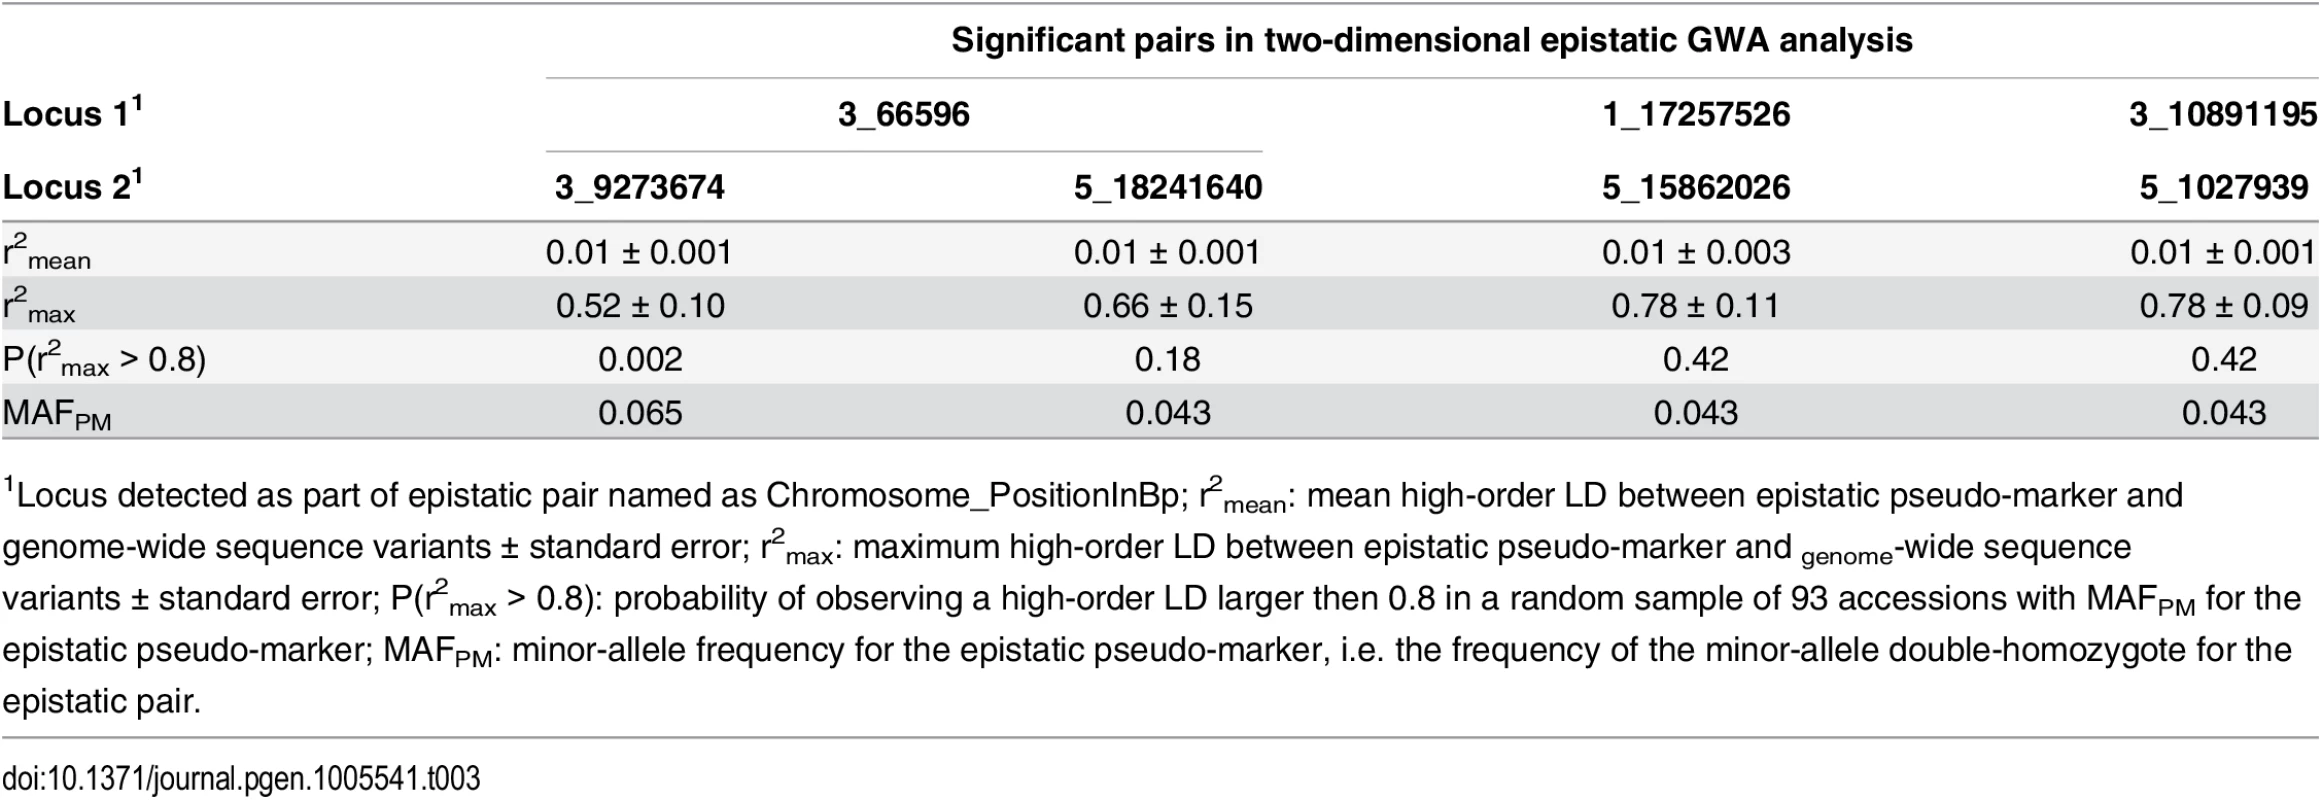 Estimation of the risk that epistatic pairs identified in the GWA analysis are due to high-order LD to unobserved functional variants (“apparent epistasis”).